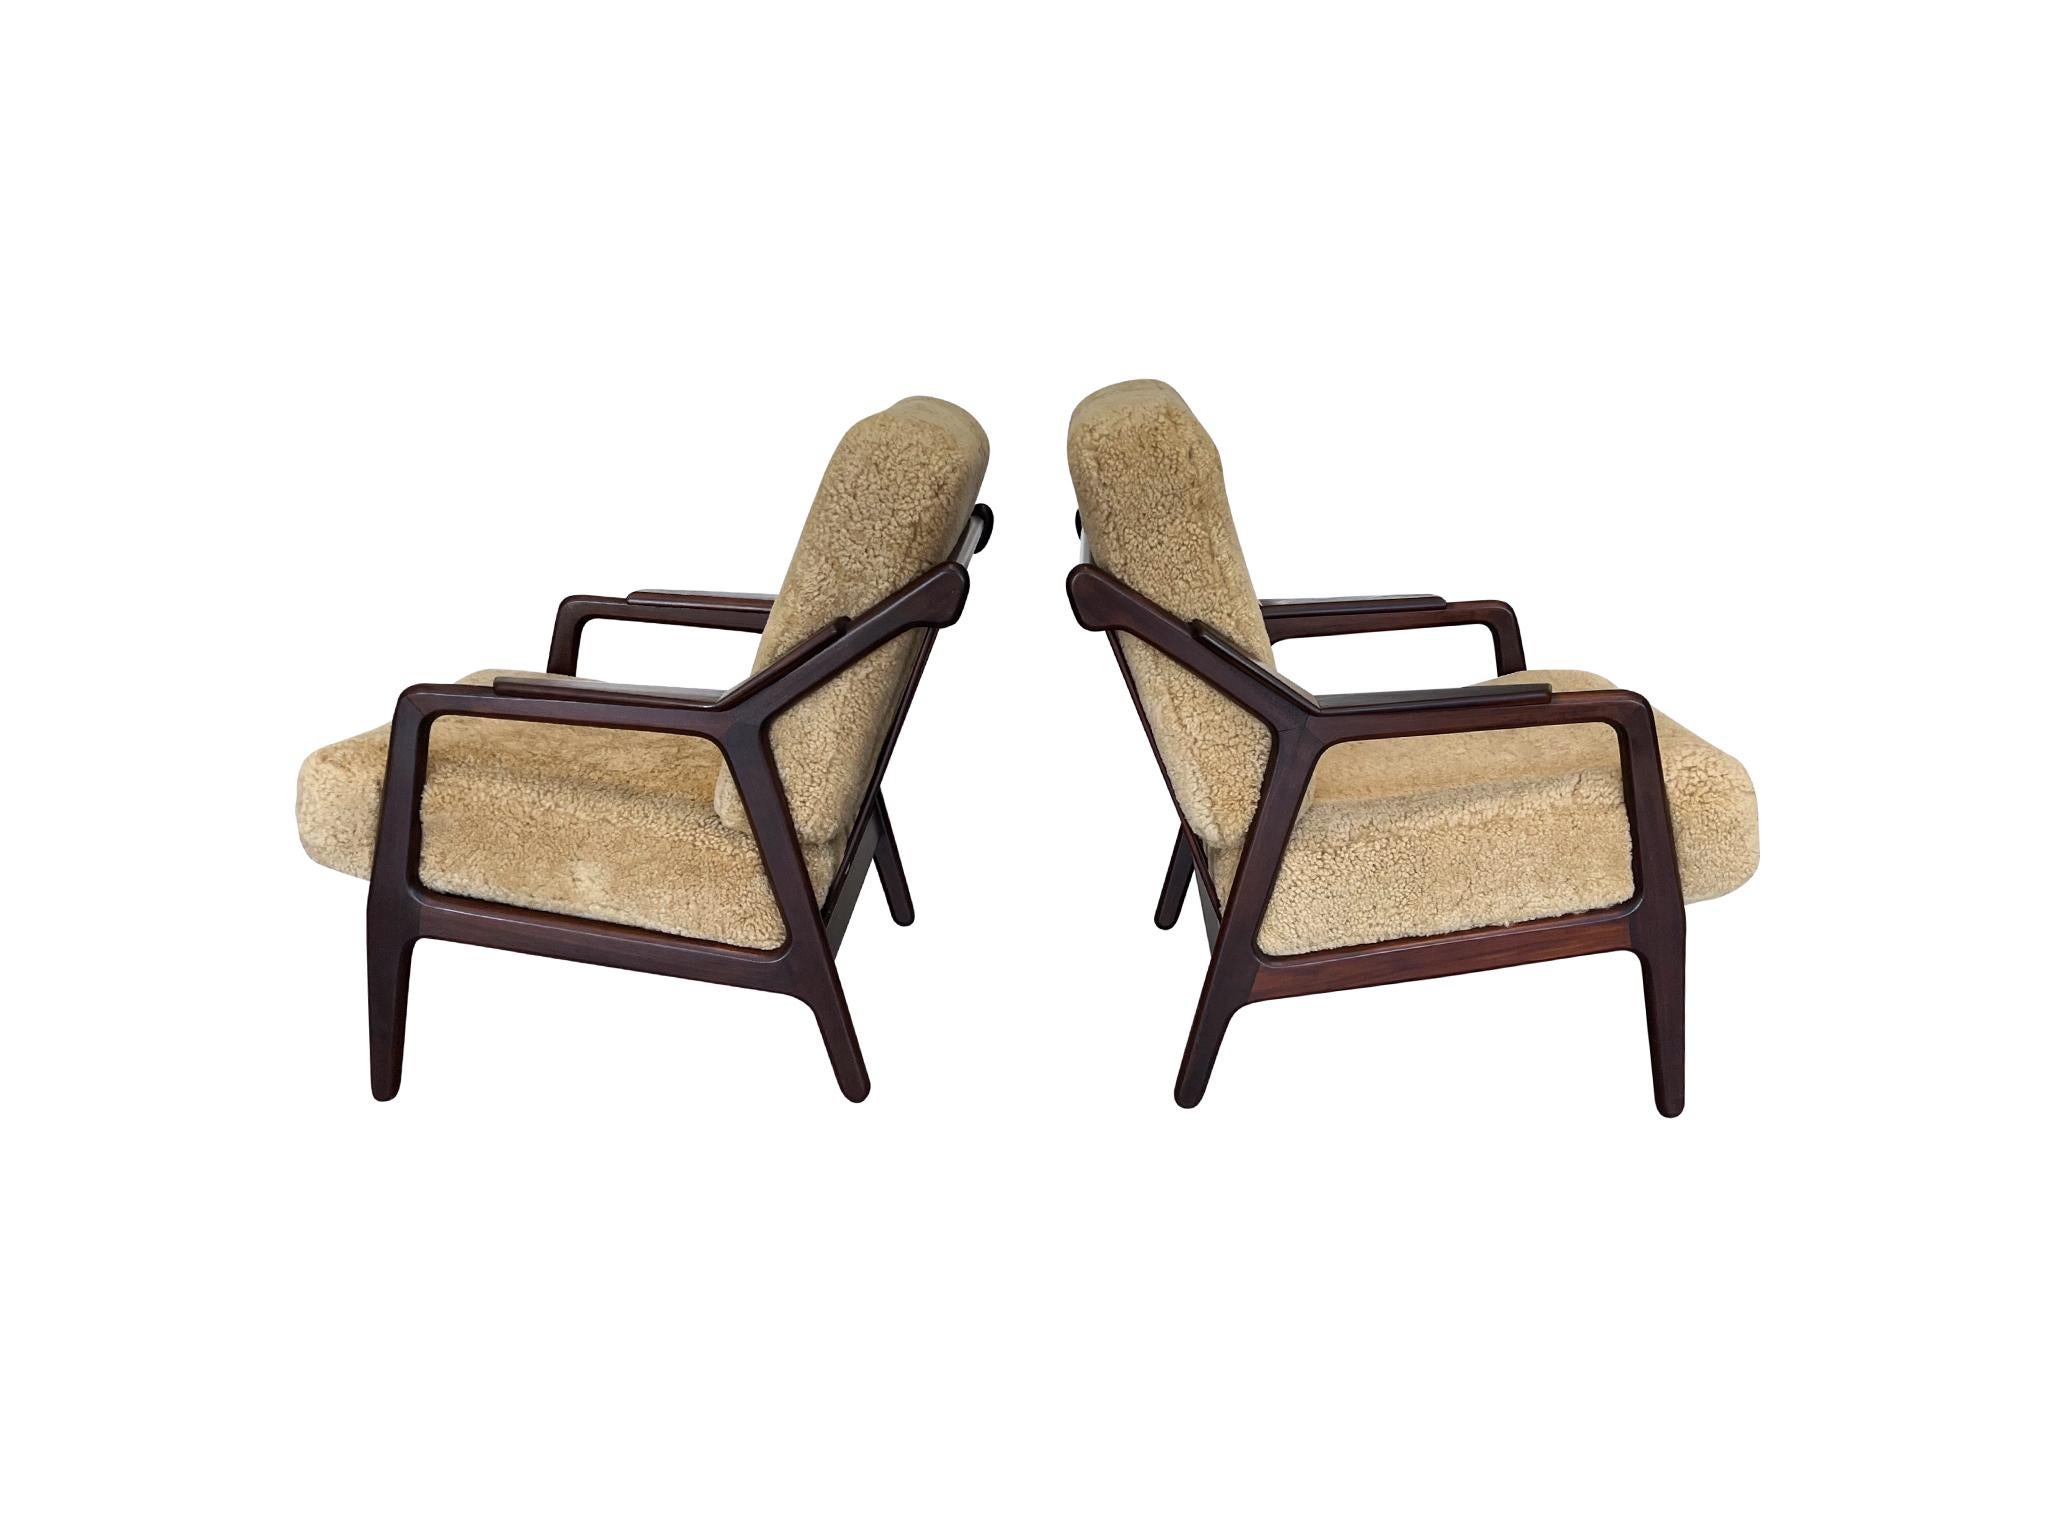 Everything about the design of these chairs exudes warmth. They are perfect for lounging. Crafted in the 1950s, they were designed by H. Brockmann-Petersen. They are walnut with new cushions and custom shearling upholstery. Angular forms and rounded